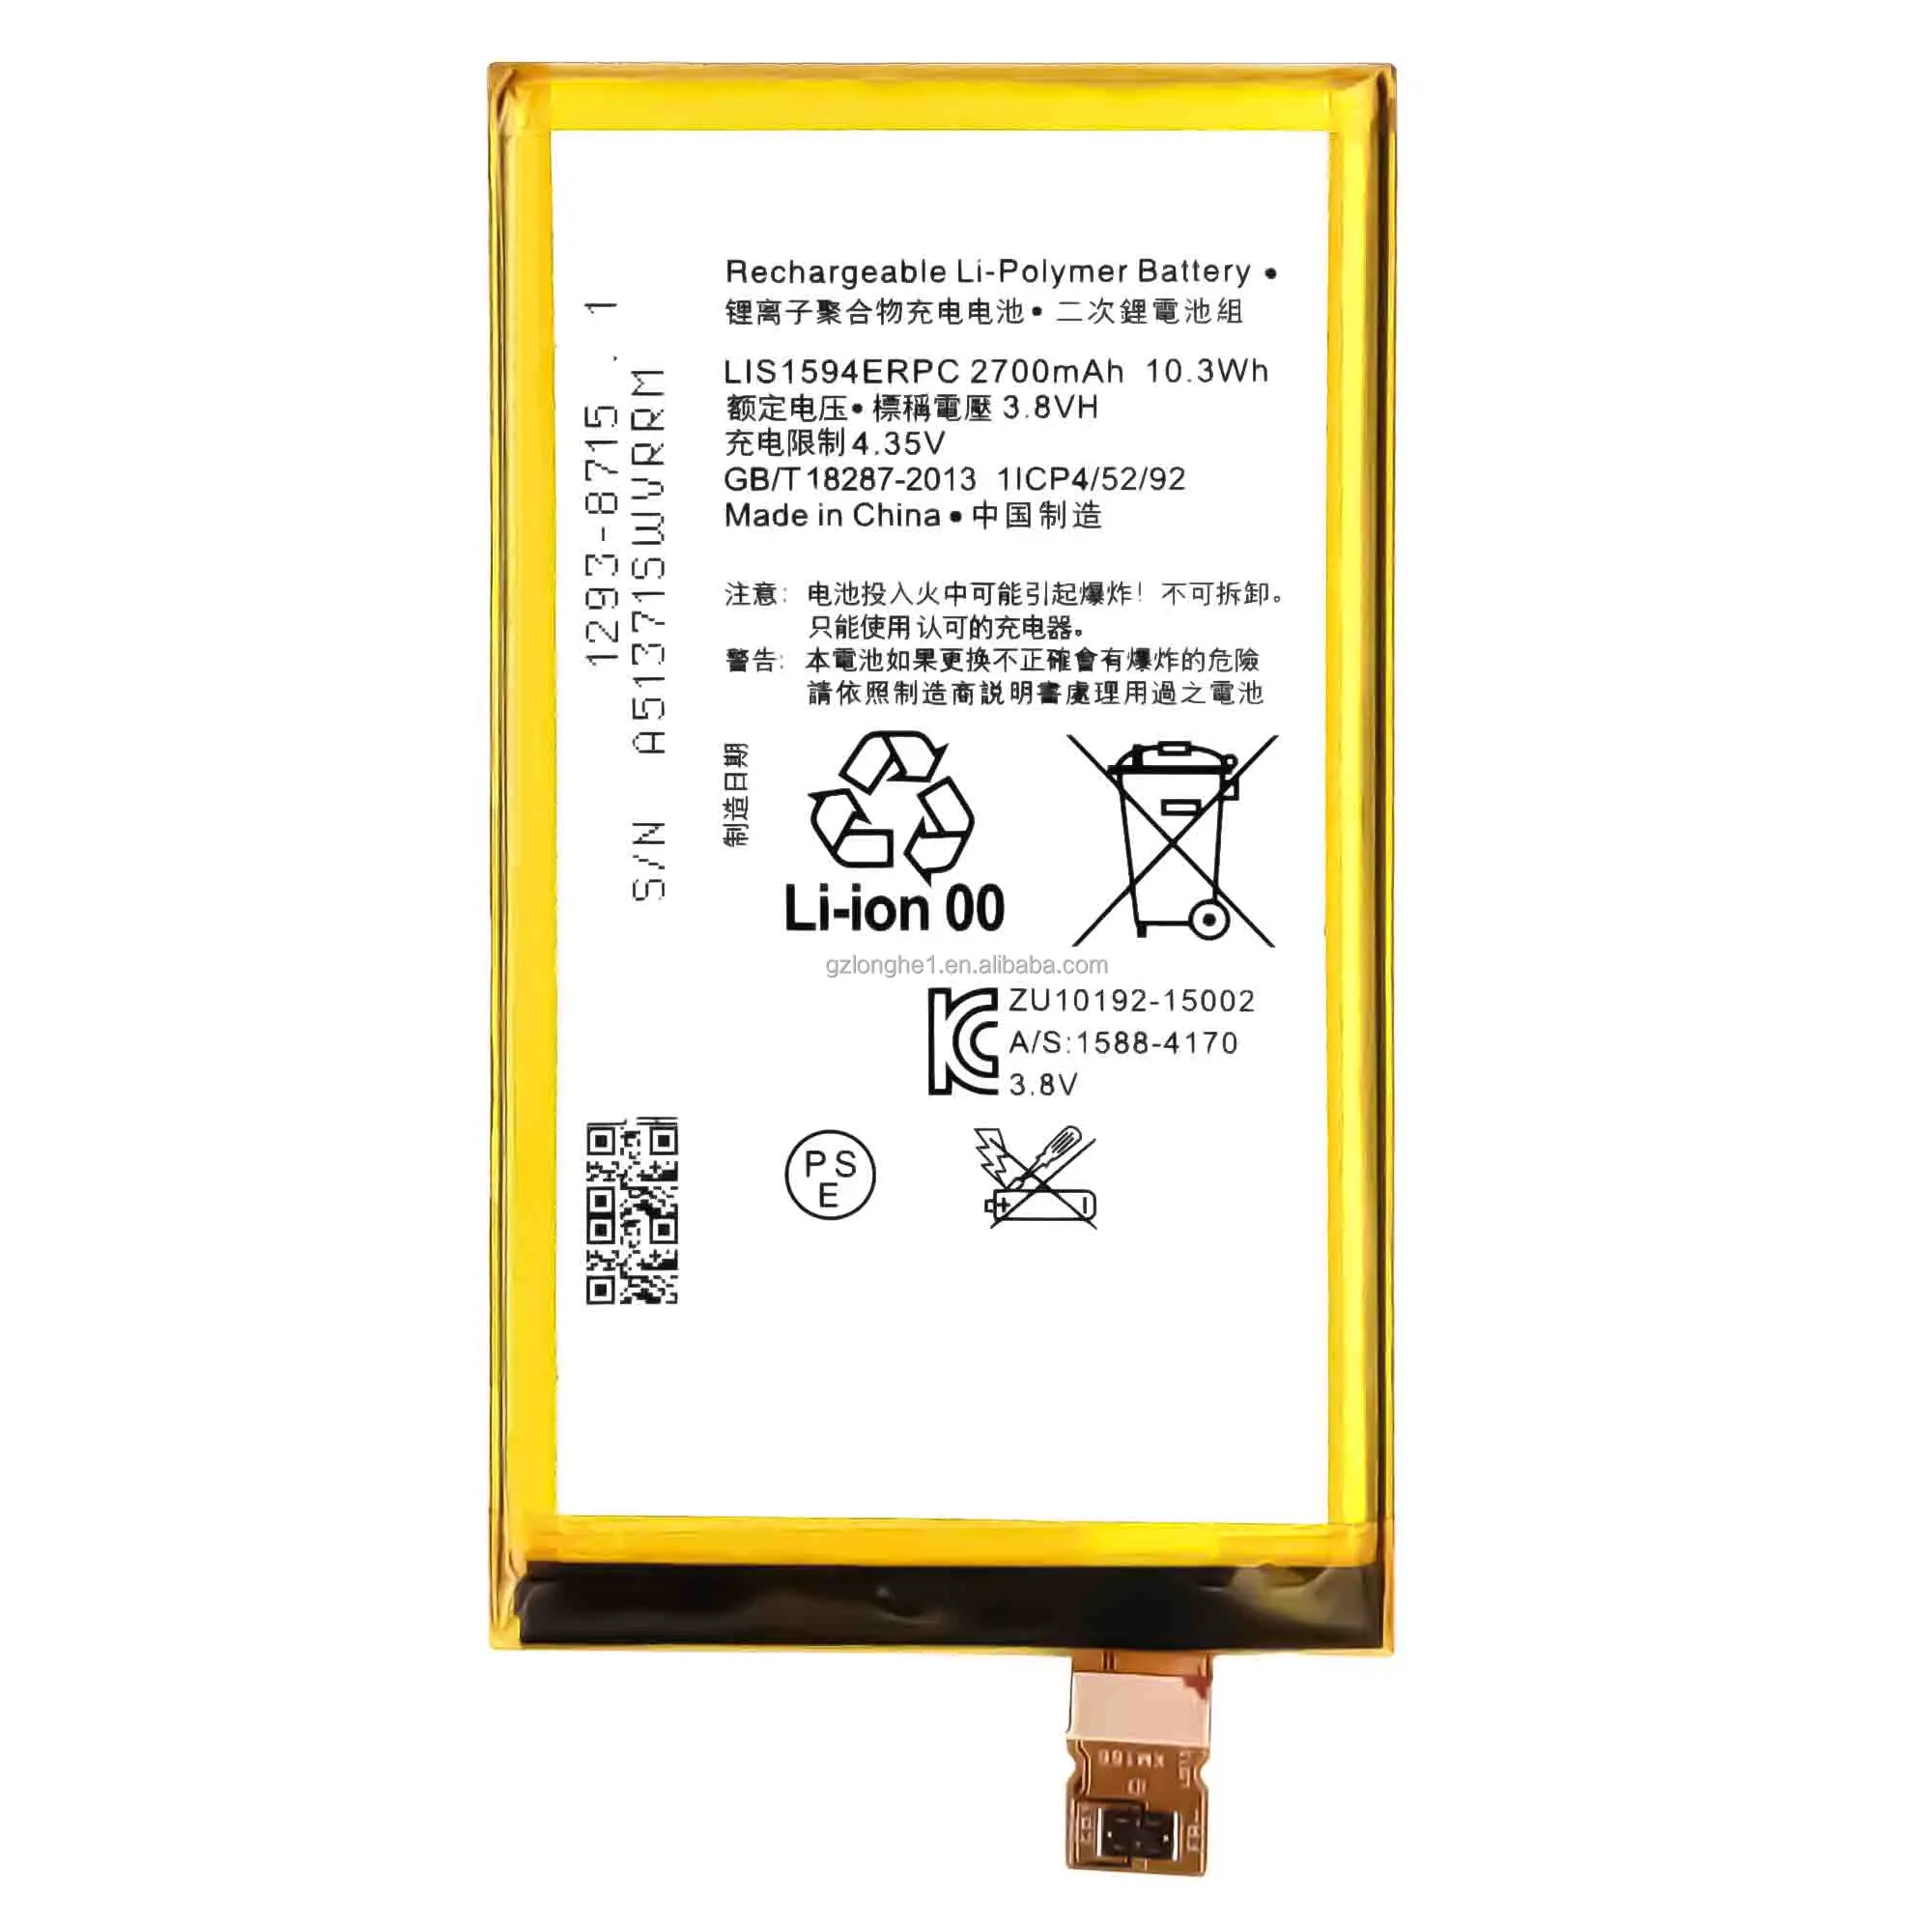 Lip1634erpc Xperia X F5321 Mobile Battery For Sony Xperia X Mini - Rechargeable Batteries,Original Batteria Mobile Phone Battery For Sony X Compact,Original Battery Product on Alibaba.com